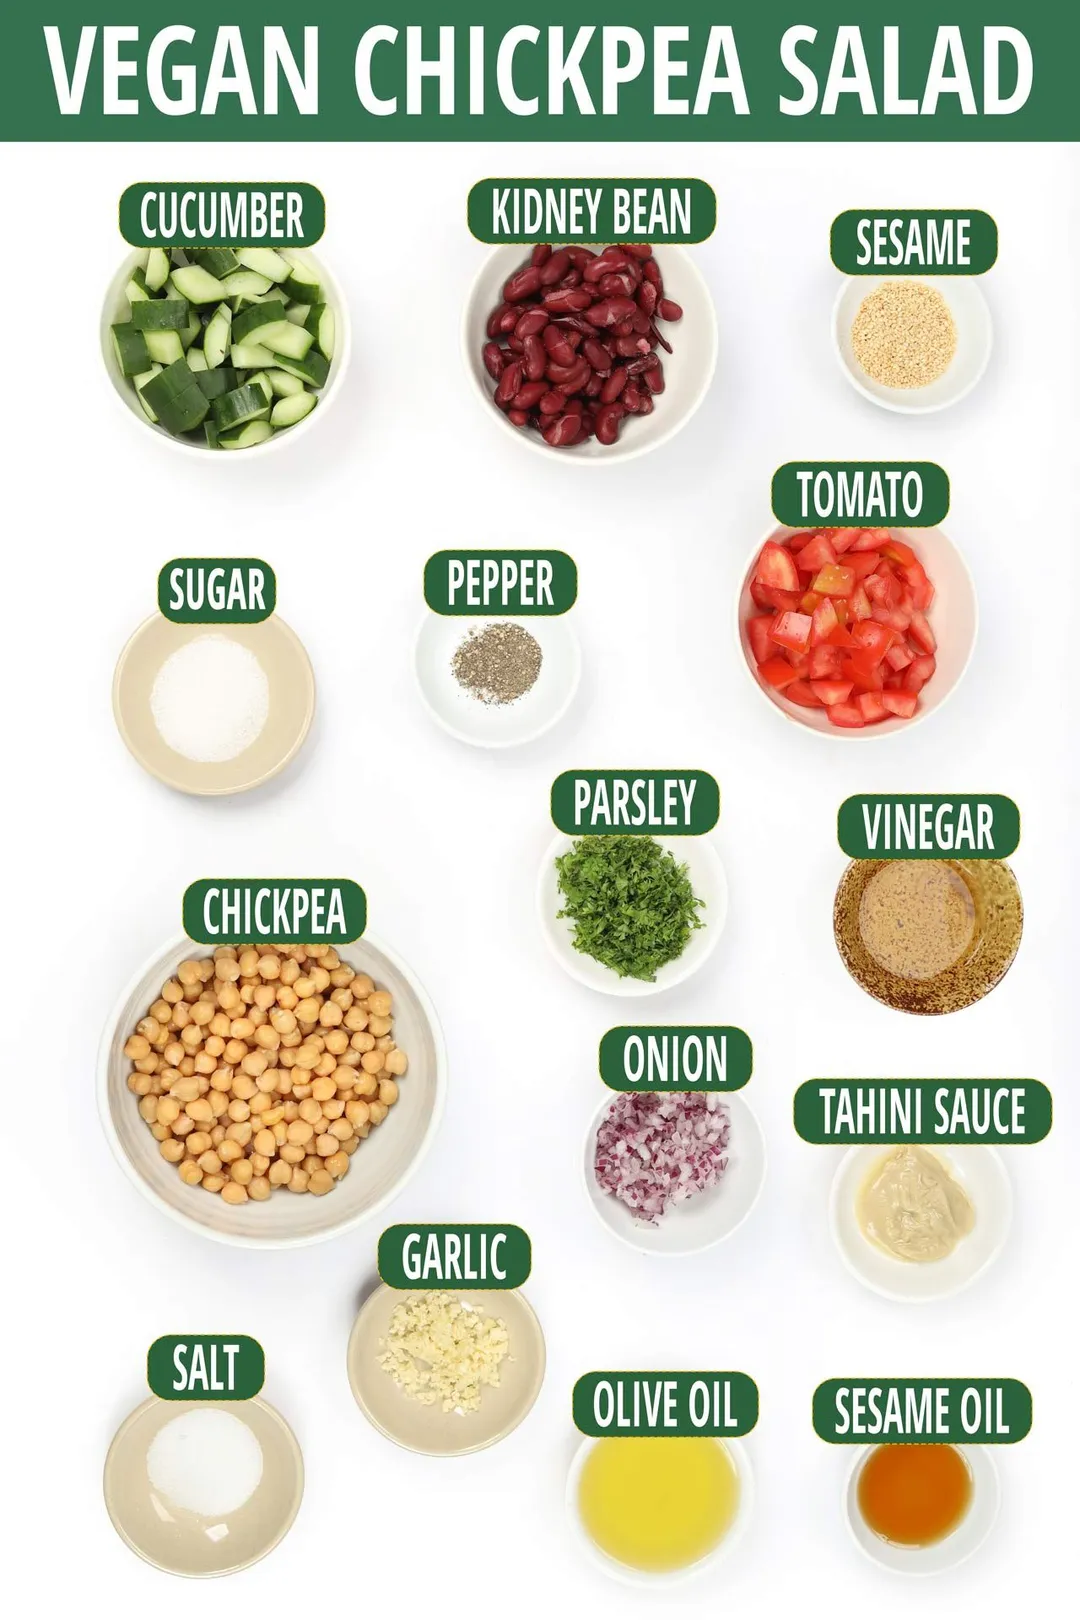 Ingredients for vegan chickpea salad, including kidney beans, chickpeas, coarsley-diced tomatoes, coarsley-diced cucumbers, and various other ingredients.